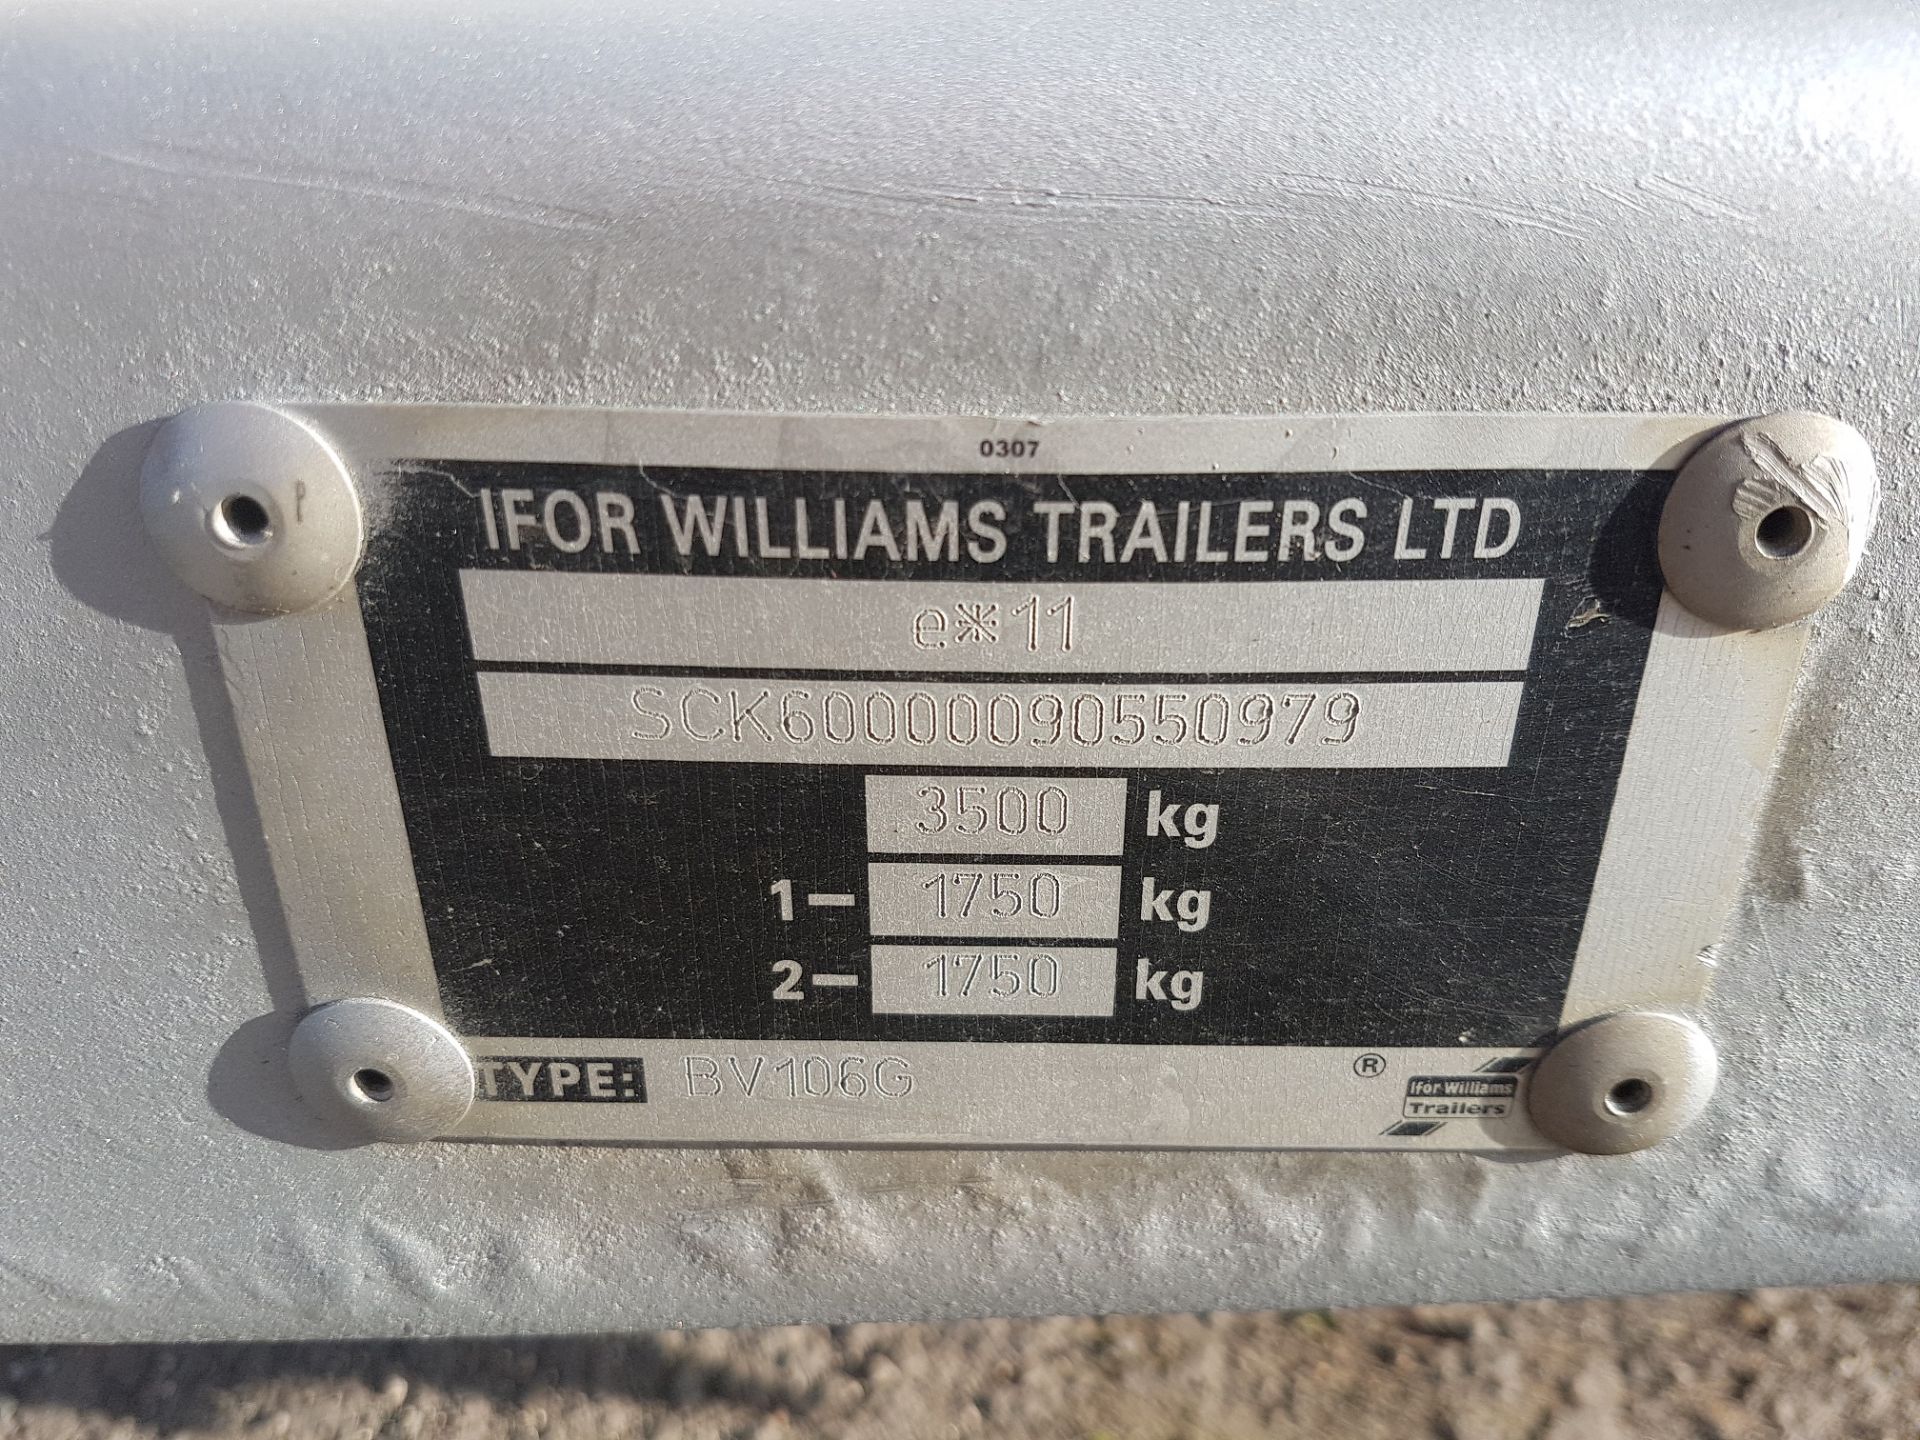 2009 IFOR WILLIAMS TWIN AXLE BV 106G BOX TRAILER 3.5 TONNE GROSS - Image 9 of 18